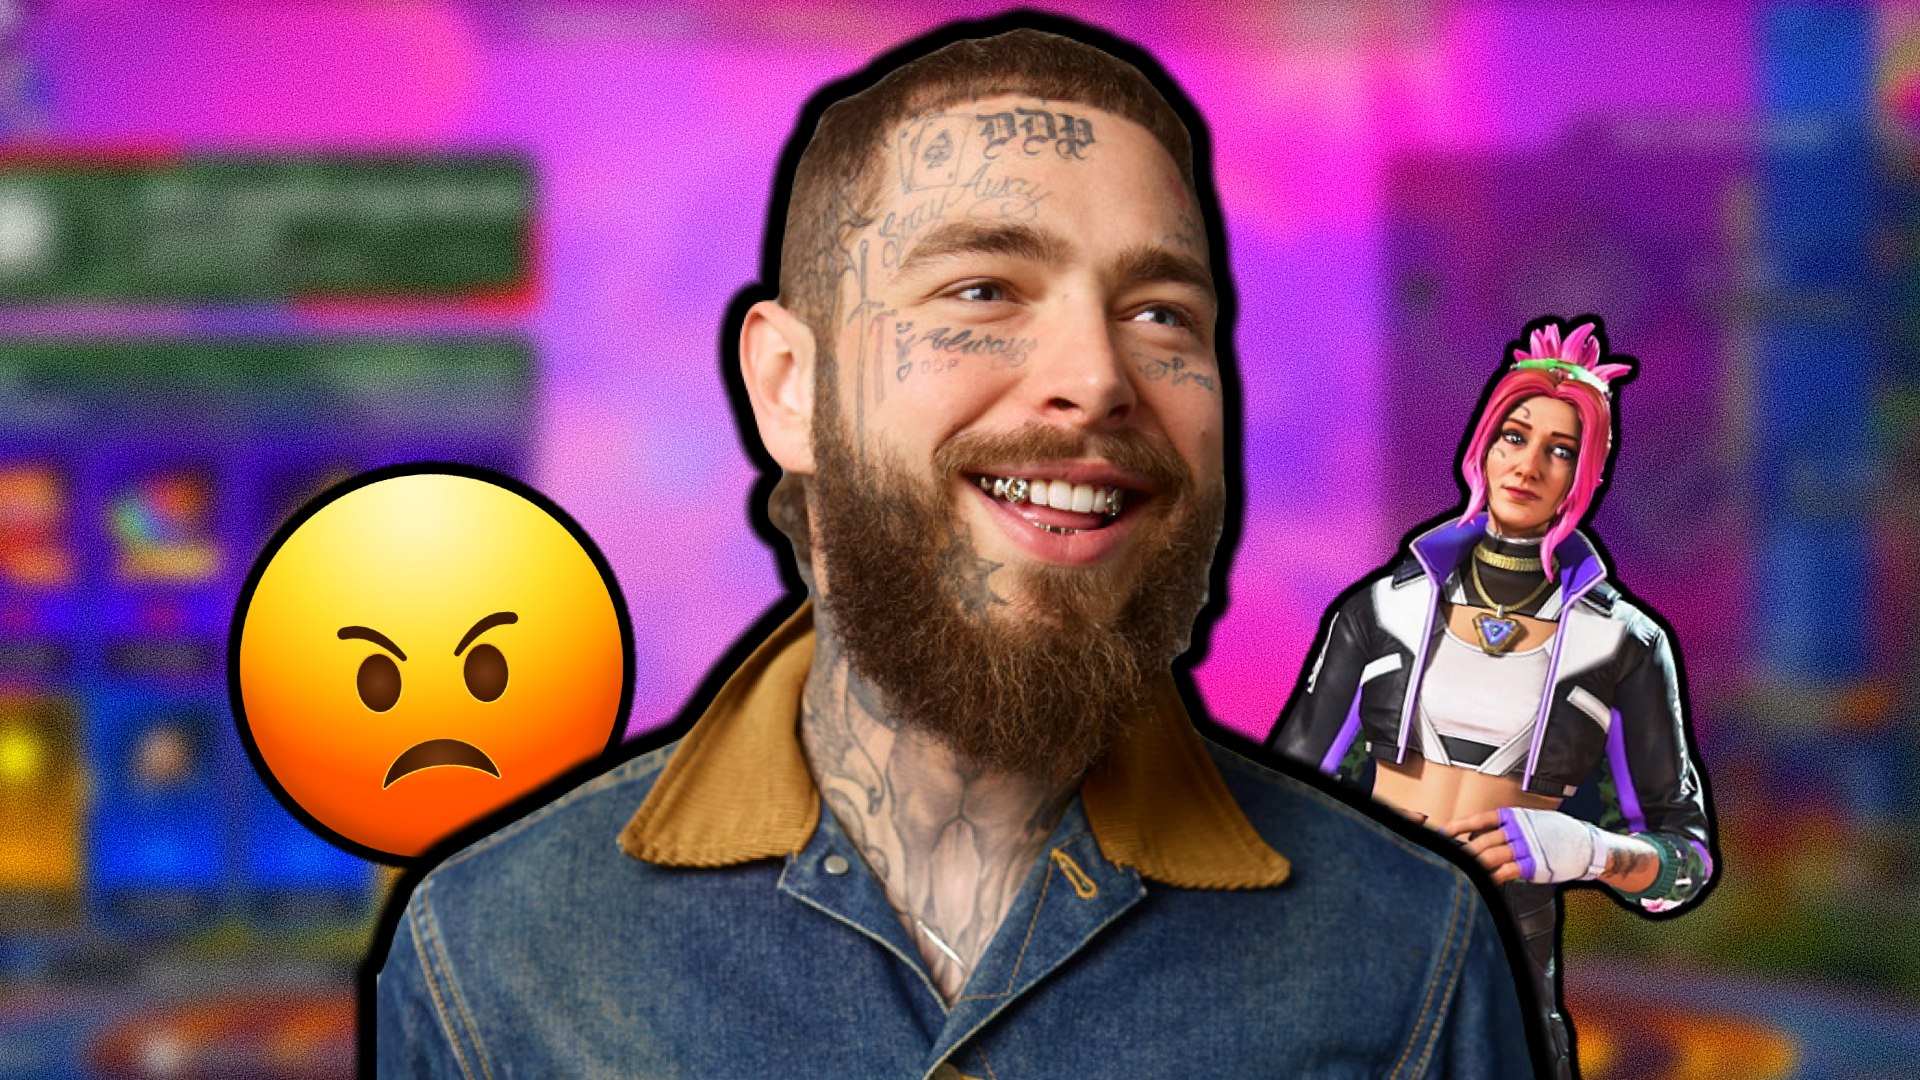 It’s impossible to earn all the Apex Legends Post Malone event rewards